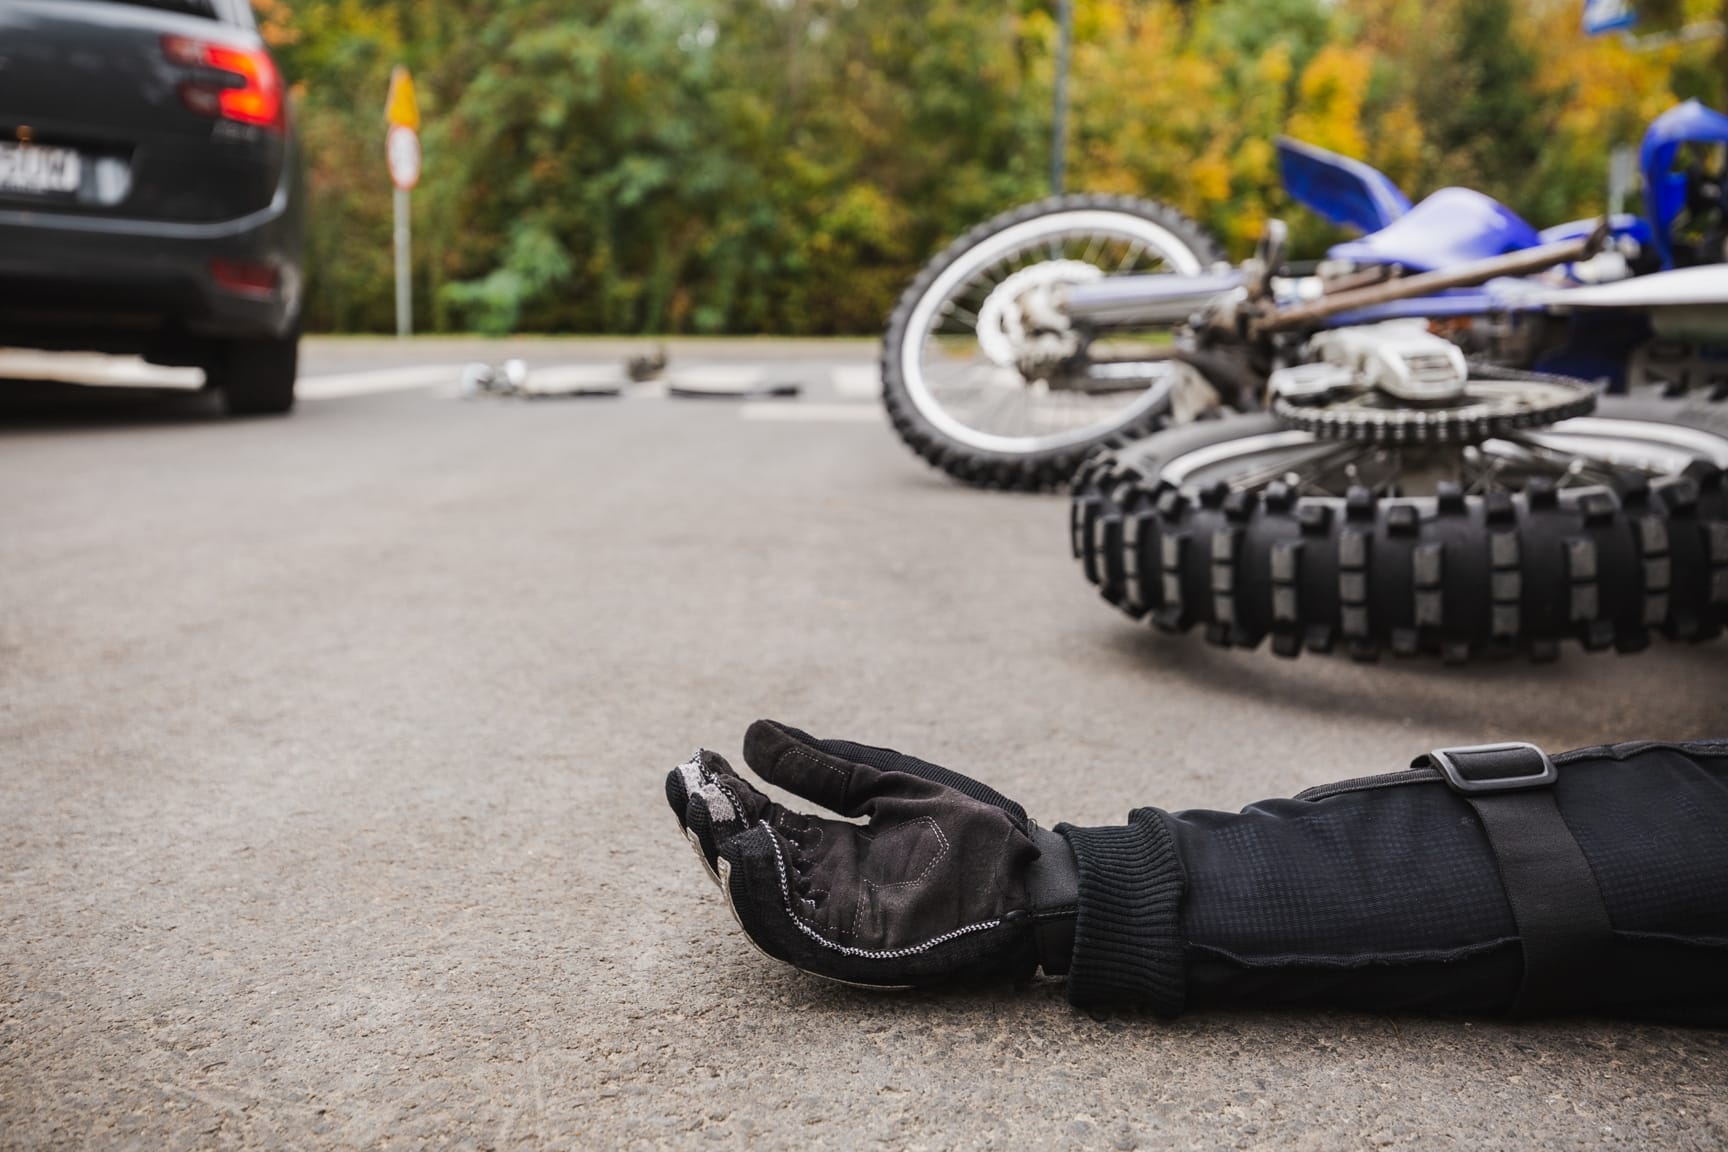 The importance of wearing protective clothing on motorbikes